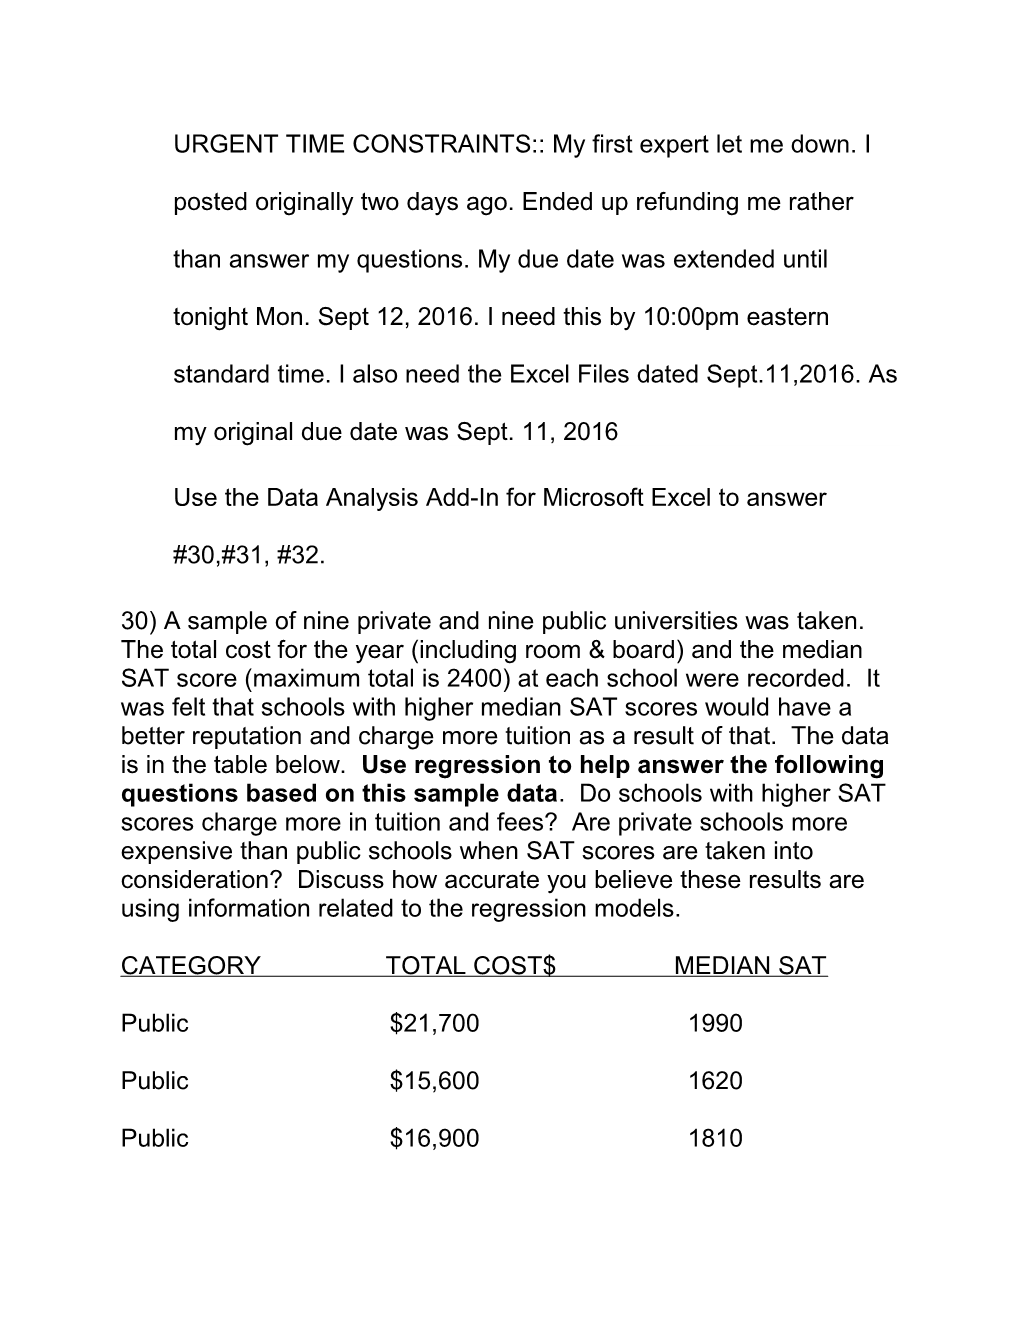 Use the Data Analysis Add-In for Microsoft Excel to Answer #30,#31, #32